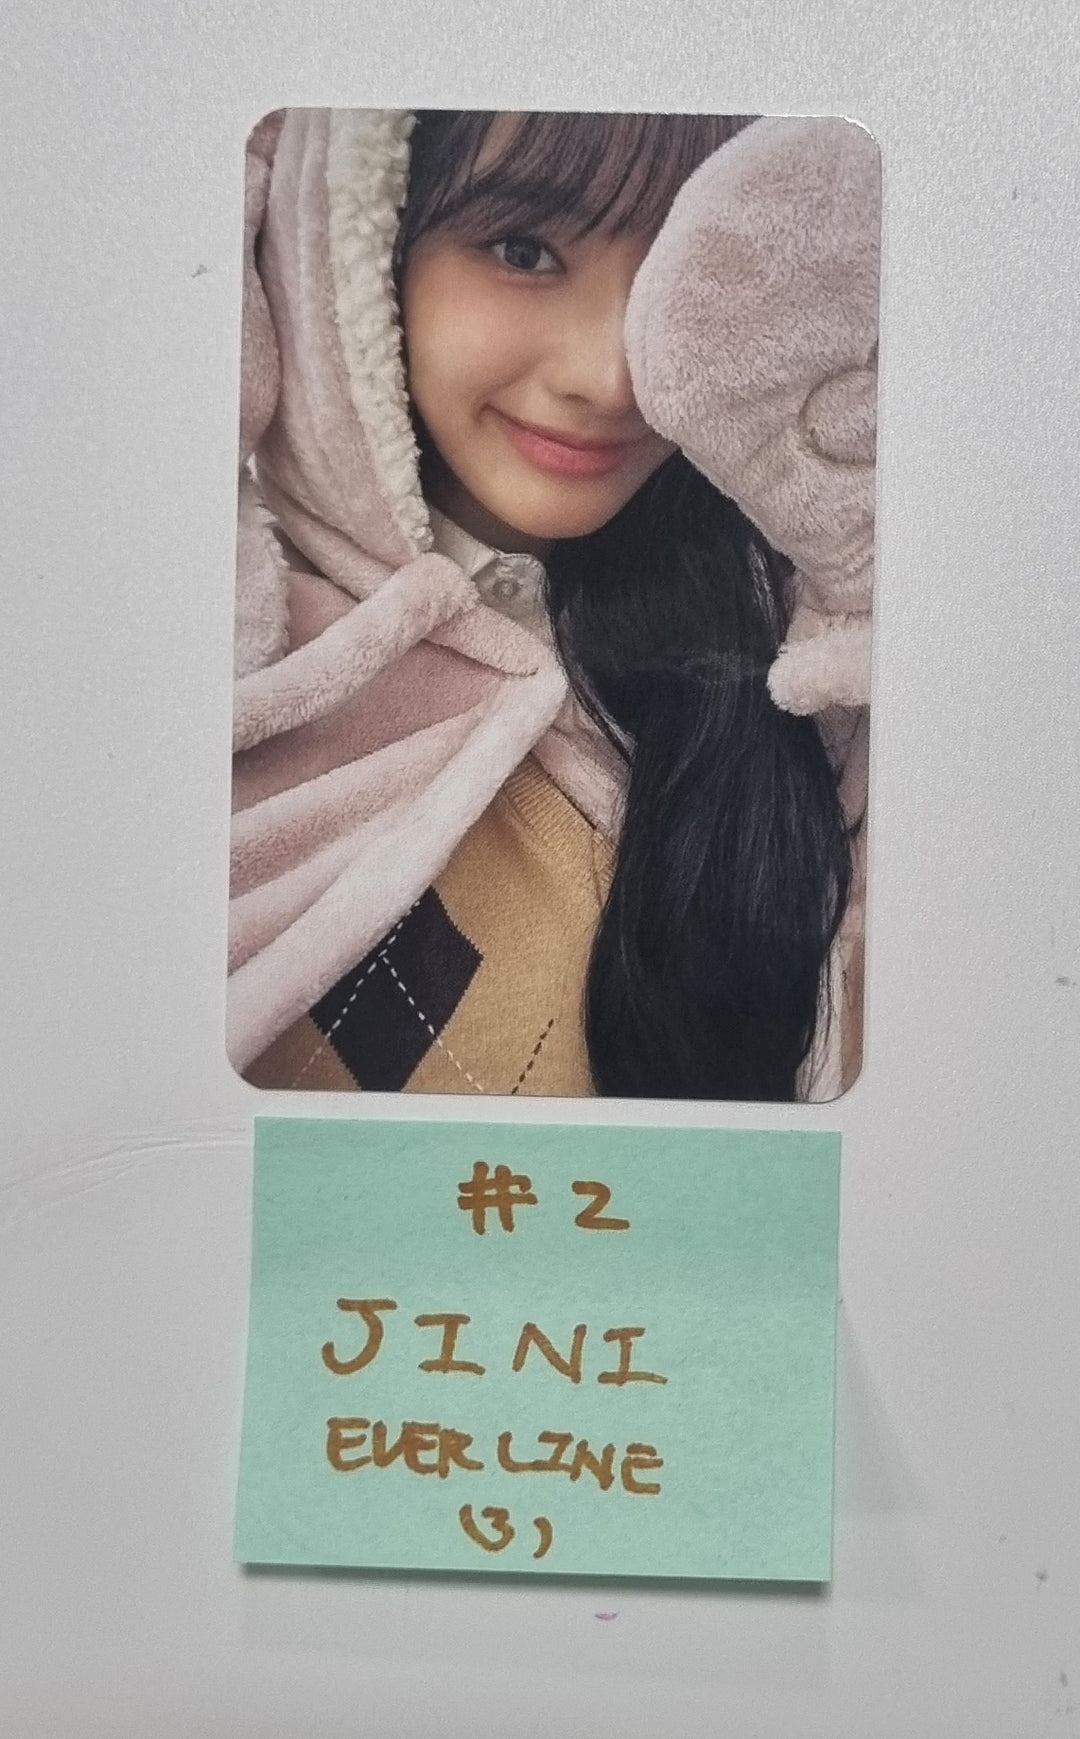 JINI "An Iron Hand In A Velvet Glove" - Everline Fansign Event Photocard [23.11.03]